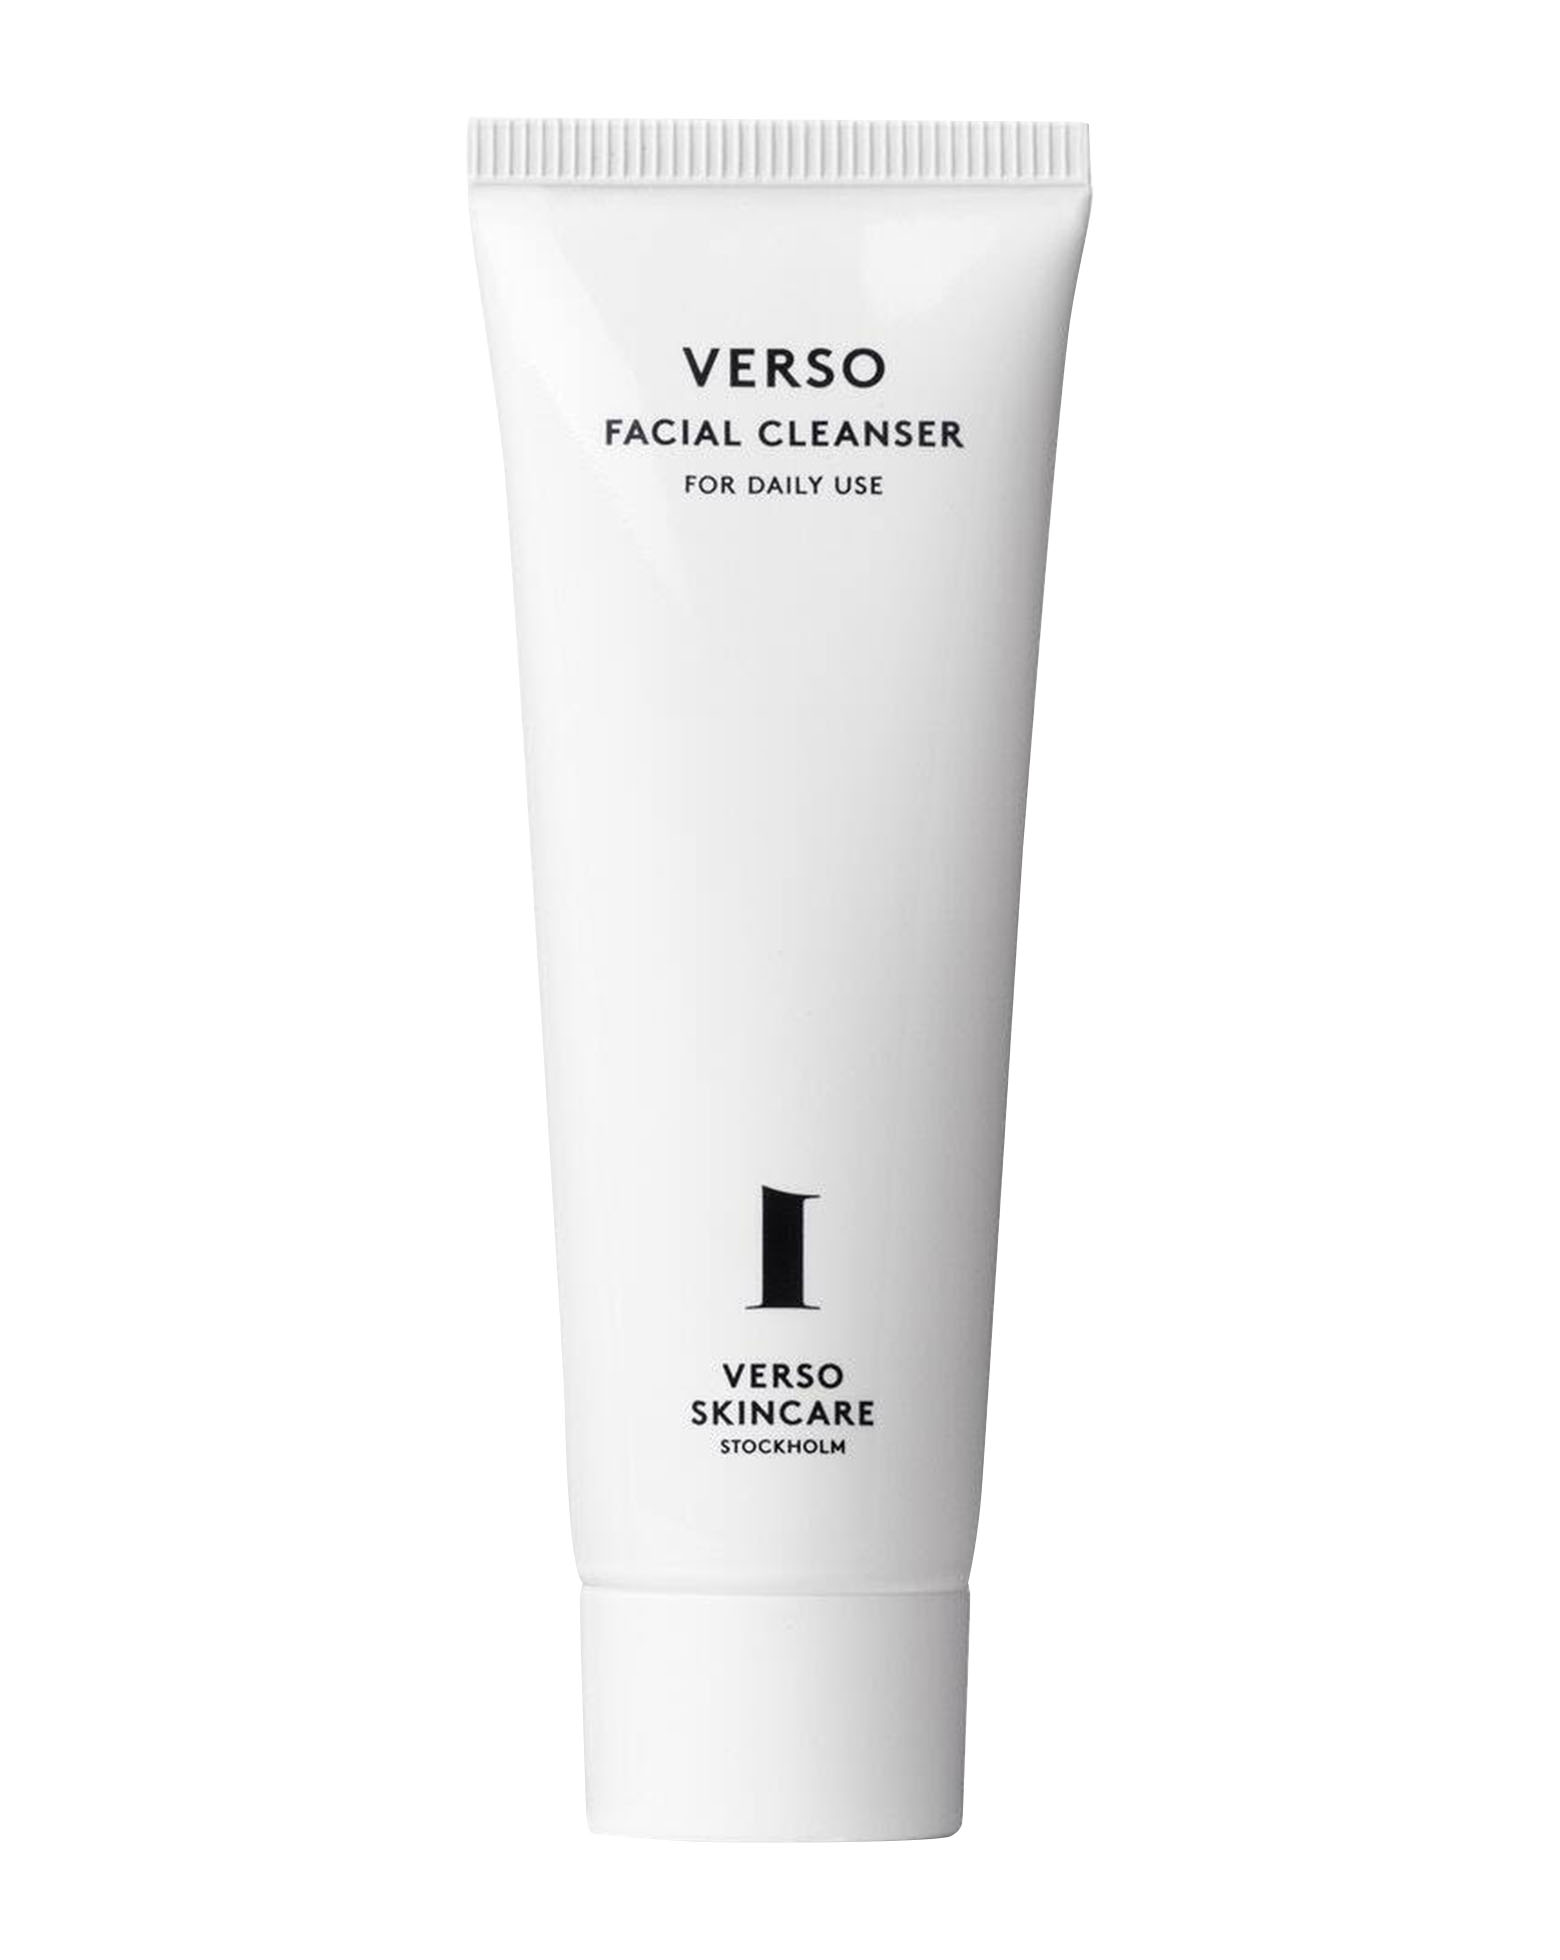 Verso Foaming Facial Cleanser